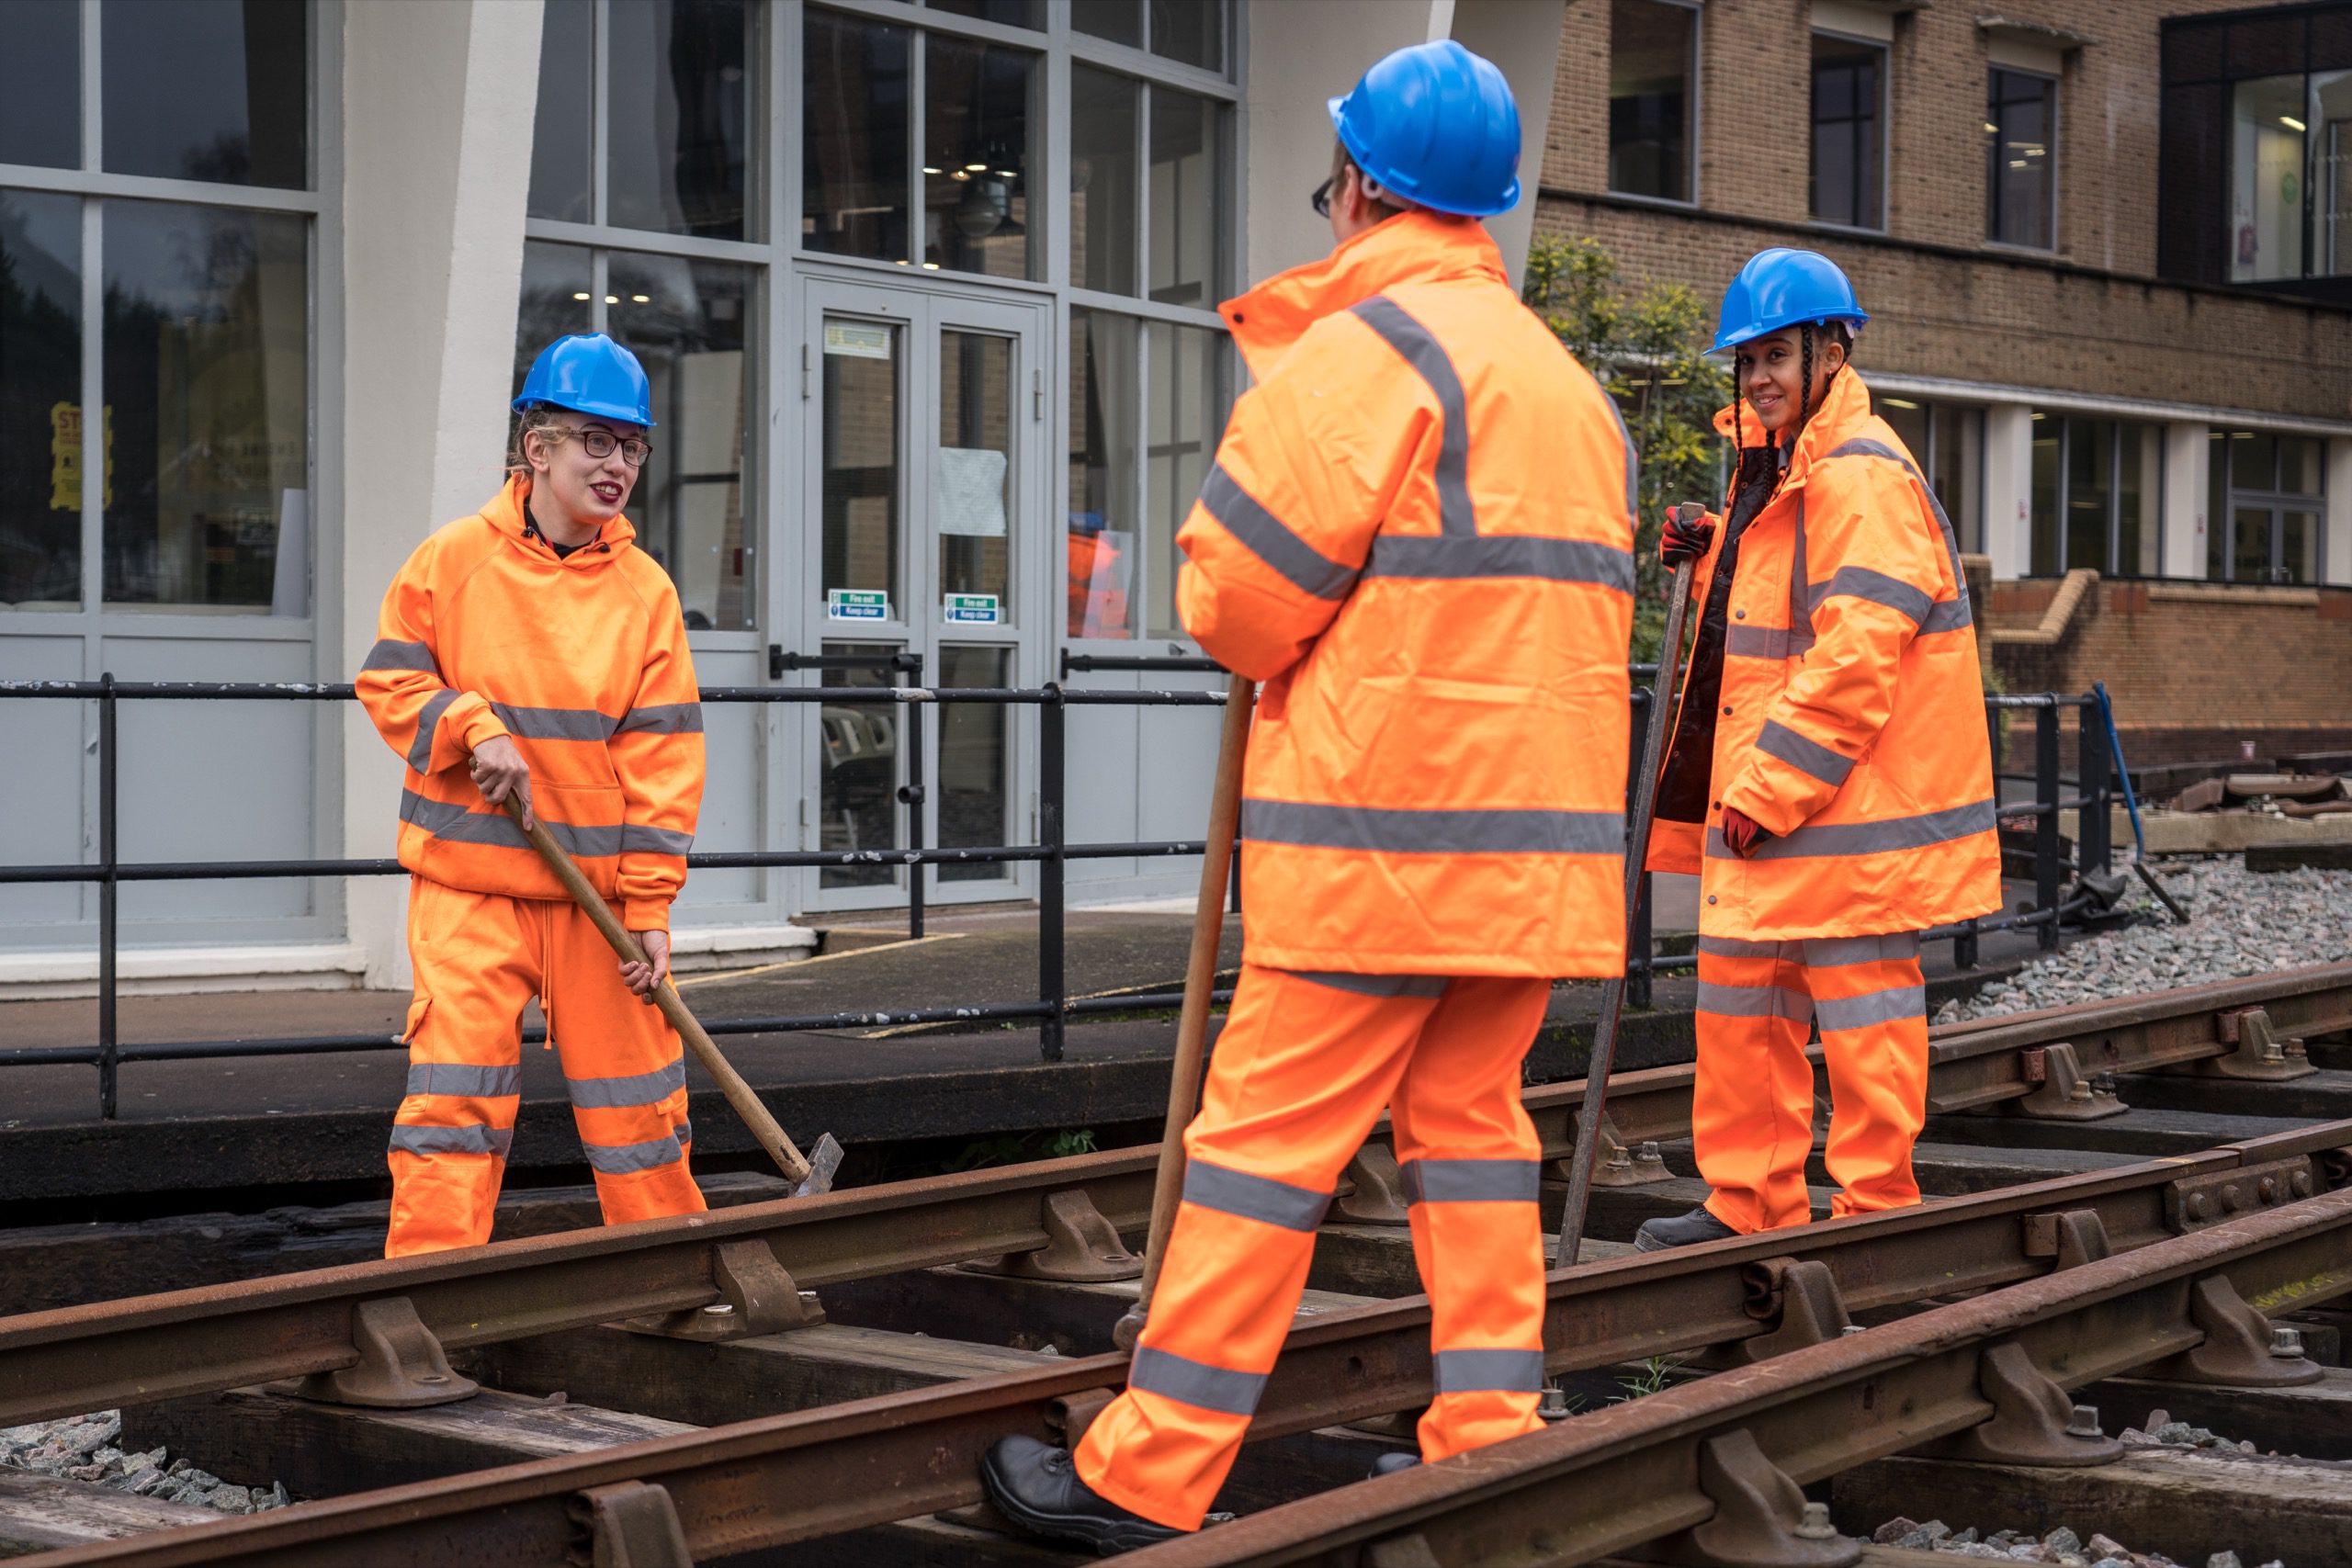 Rail workers standing on tracks, in hi-vis jackets and hard hats.